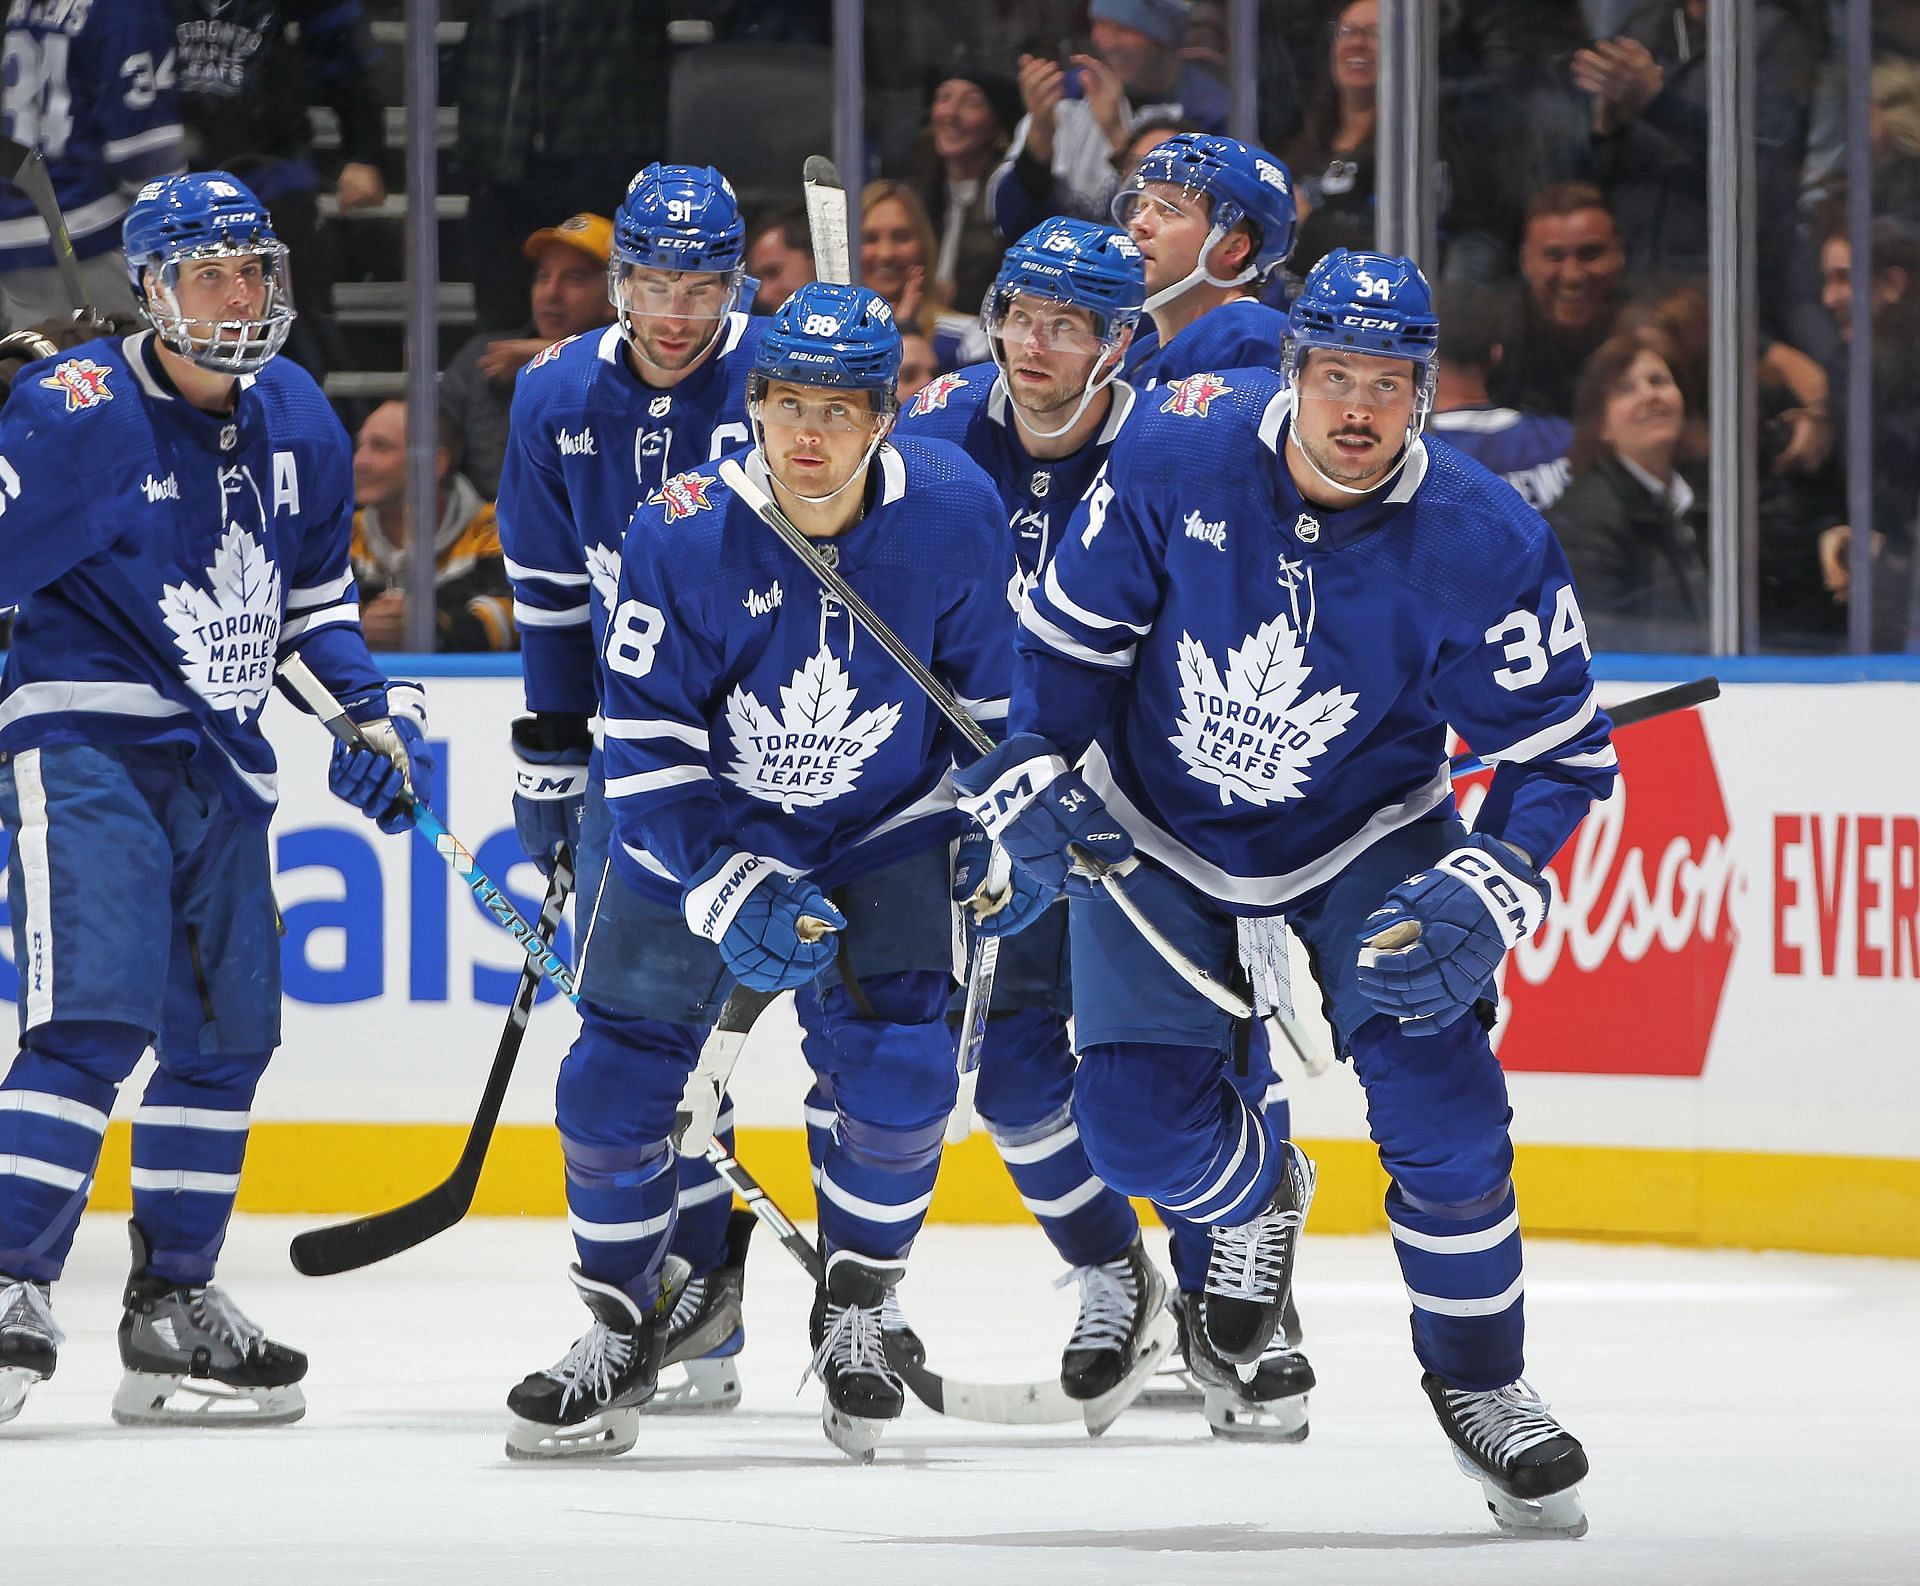 Toronto Maple Leafs are led by Auston Matthews, William Nylander, and Mitch Marner.